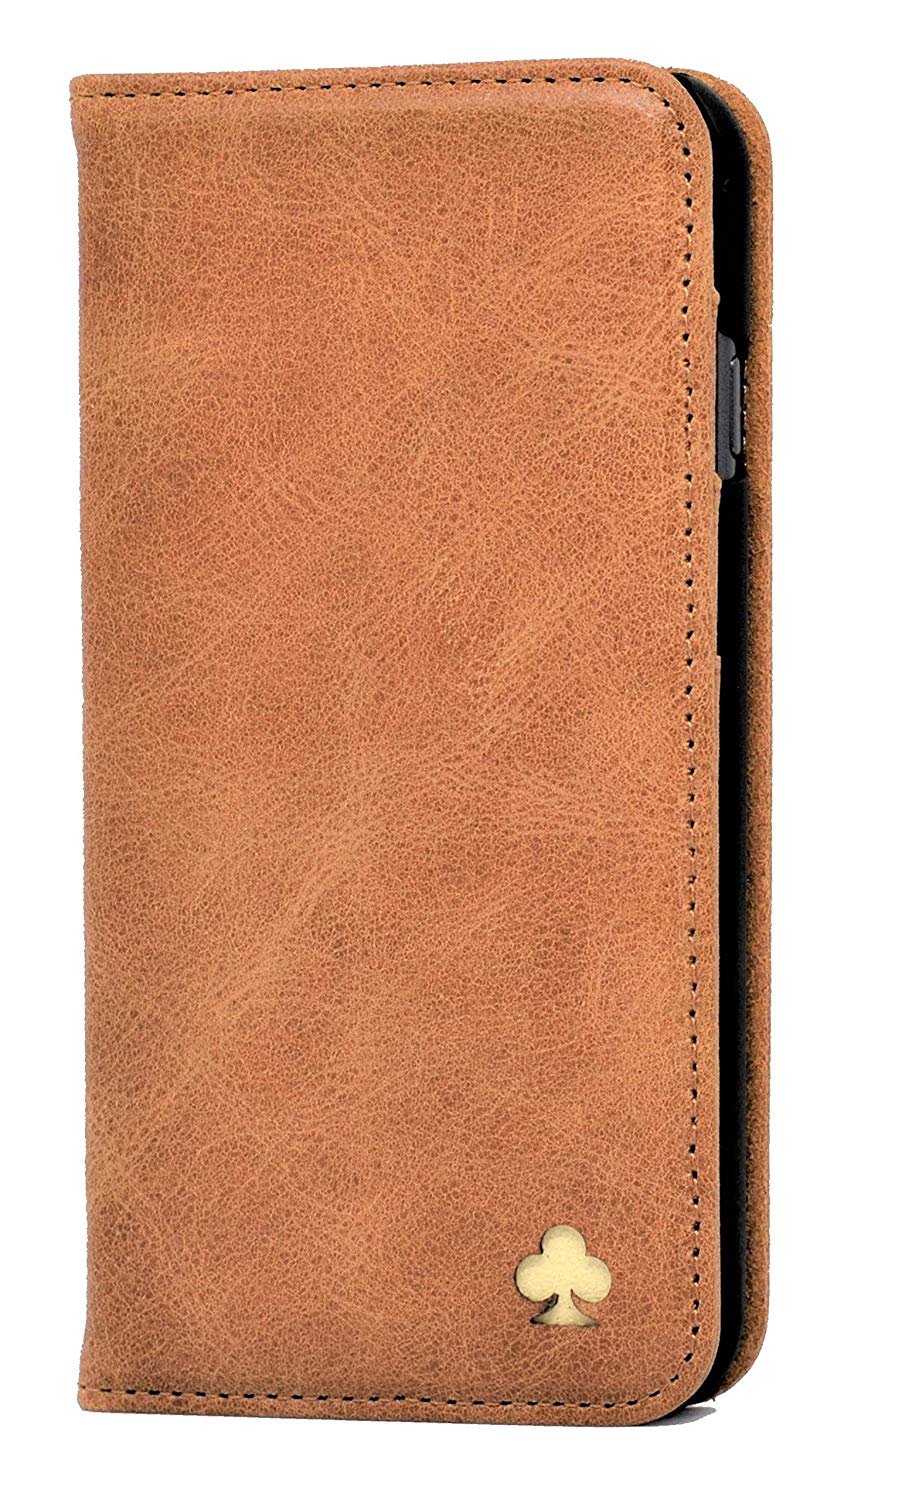 Google Pixel 2 Leather Case. Premium Slim Genuine Leather Stand Case/Cover/Wallet (Tan)